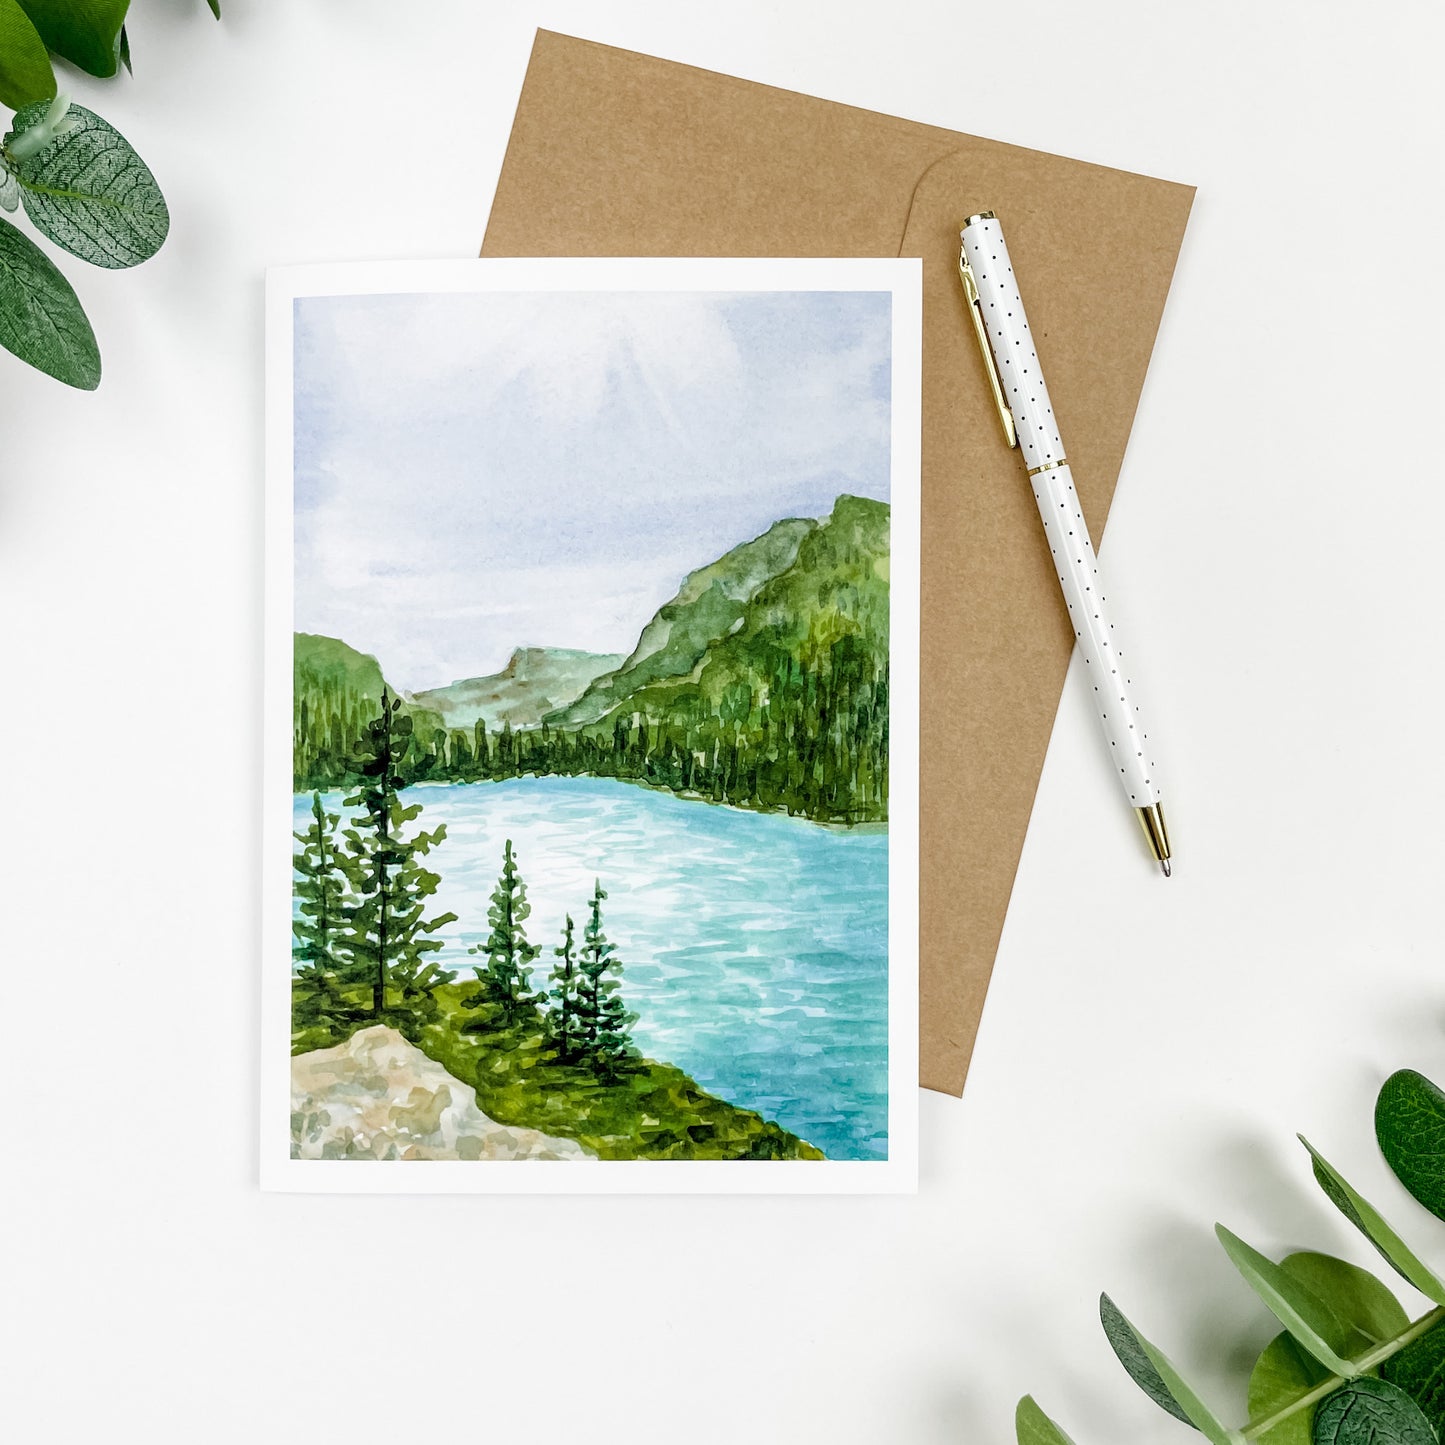 The Blue Skies Collection 5x7" Greeting Cards